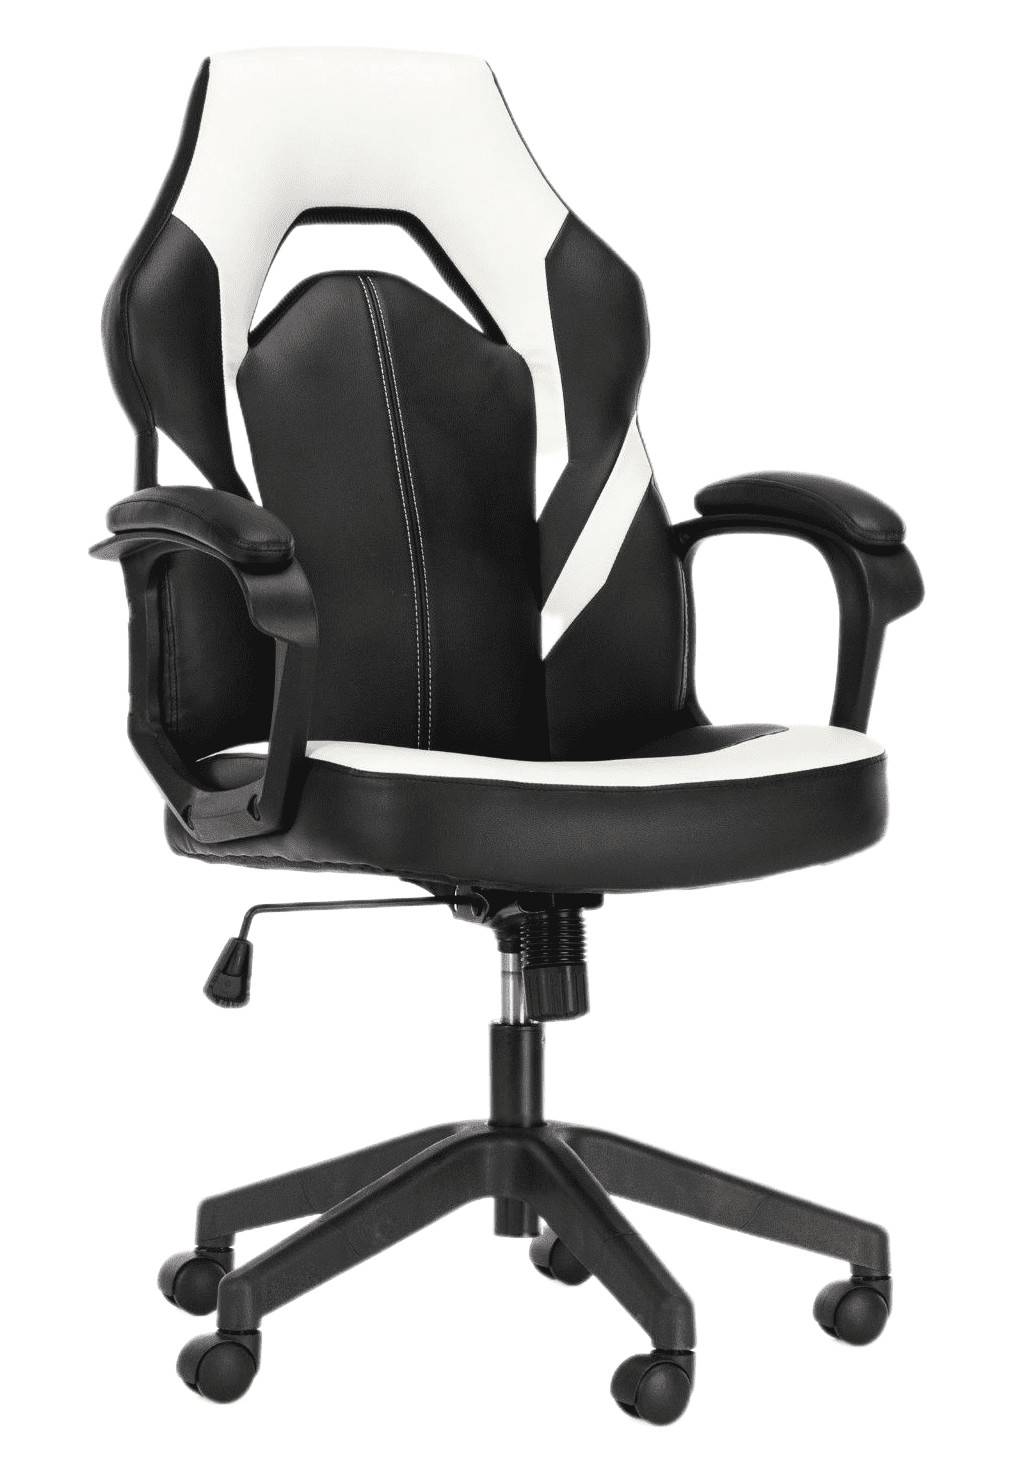 Blue GTRACING Gaming Chair Mid Back Office Computer Chairs Swivel Leather Desk Chair Ergonomic Padded Back and Seat Height Adjustment Rocking PC Chair 